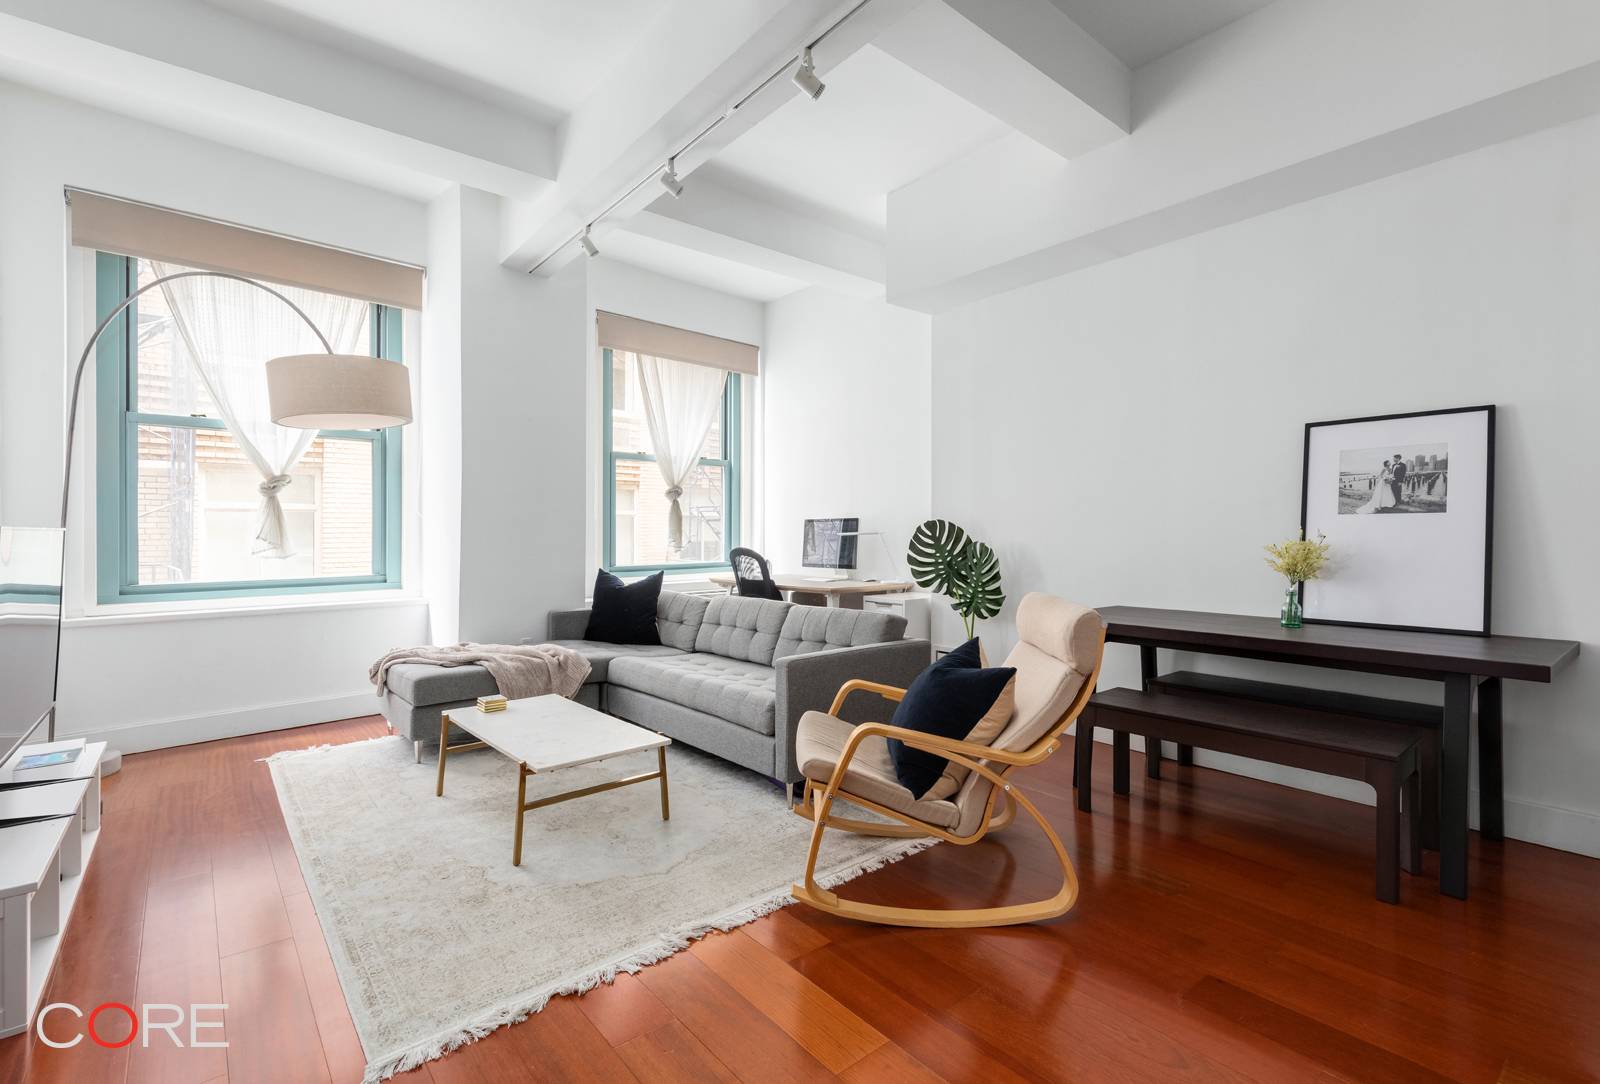 Residence 10E is an ideal pre war loft for downtown living.